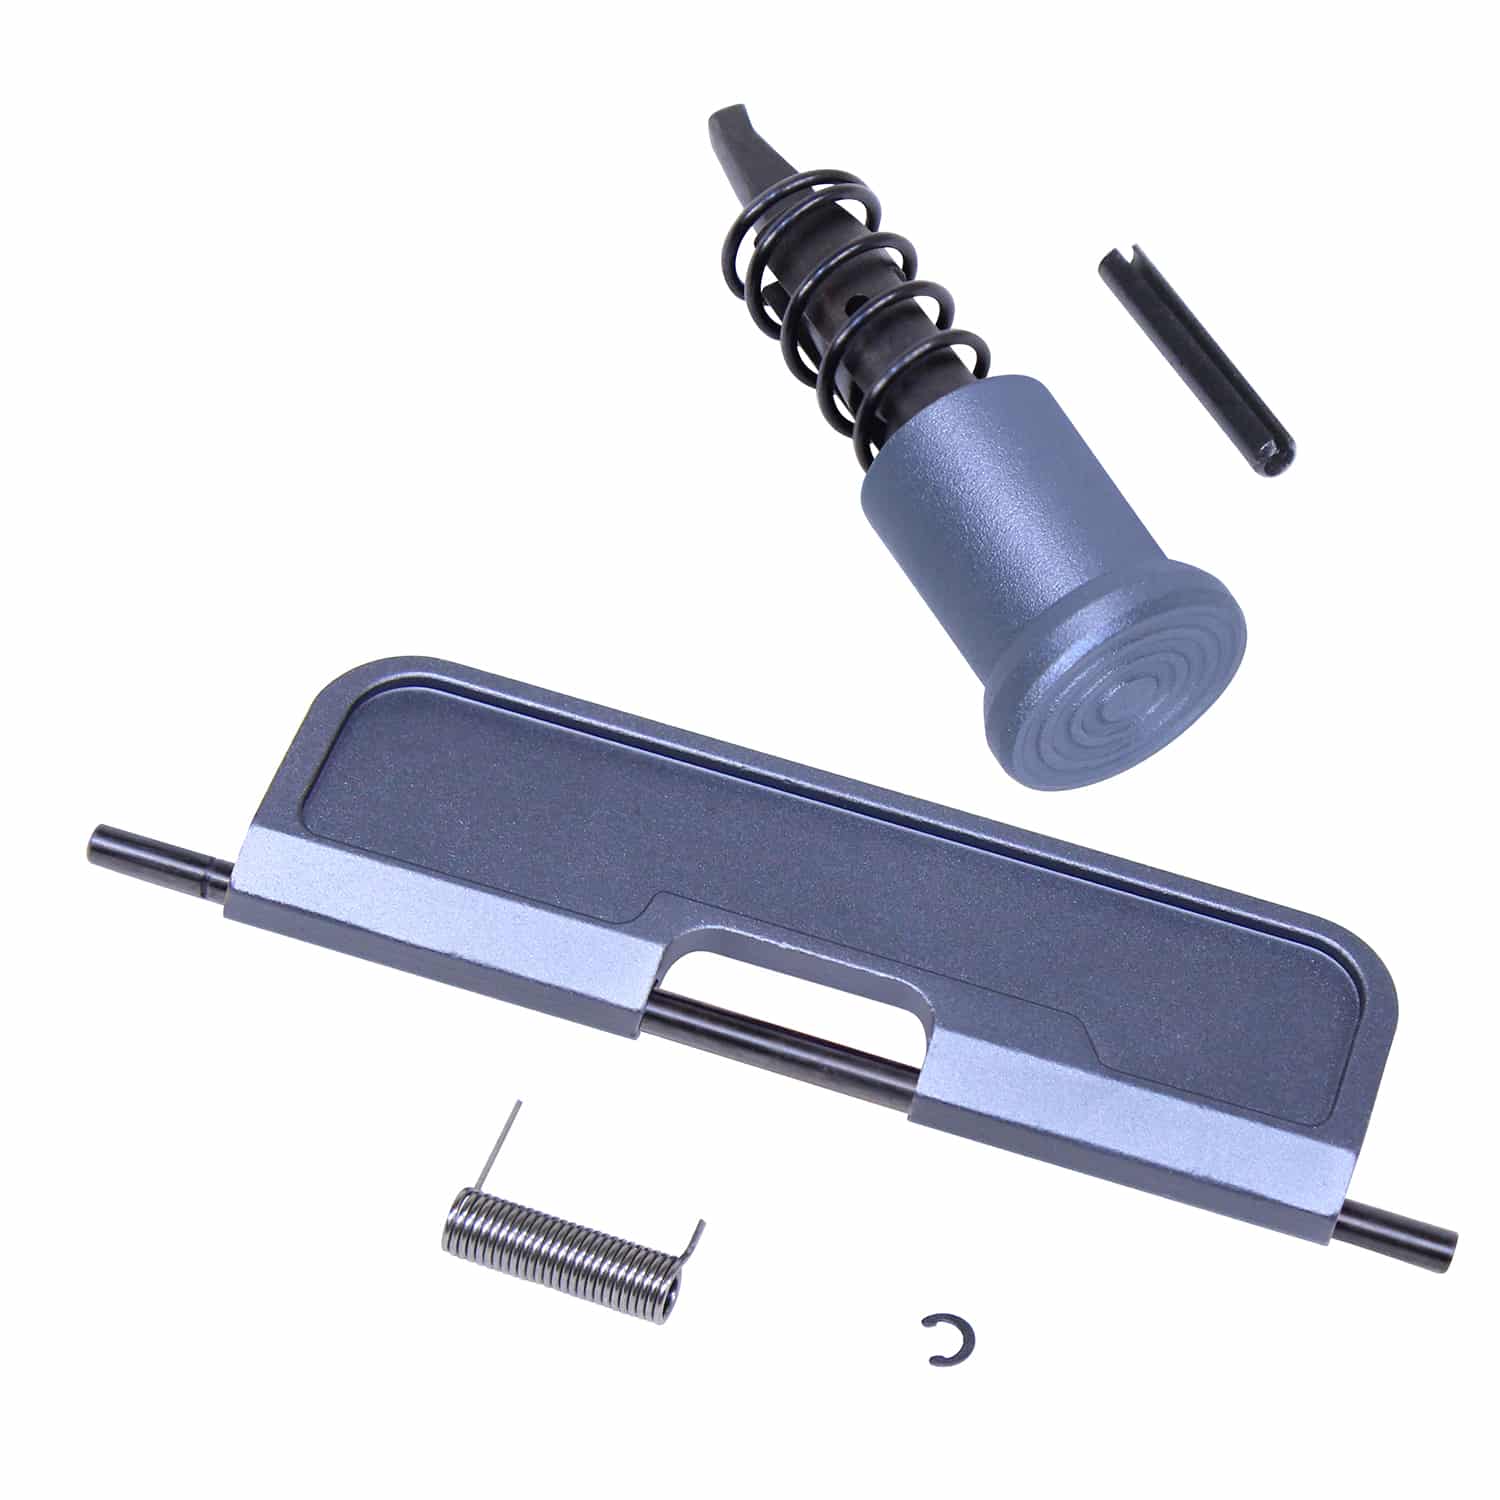 AR-15 Upper Completion Kit With Gen 3 Dust Cover (Anodized Grey)